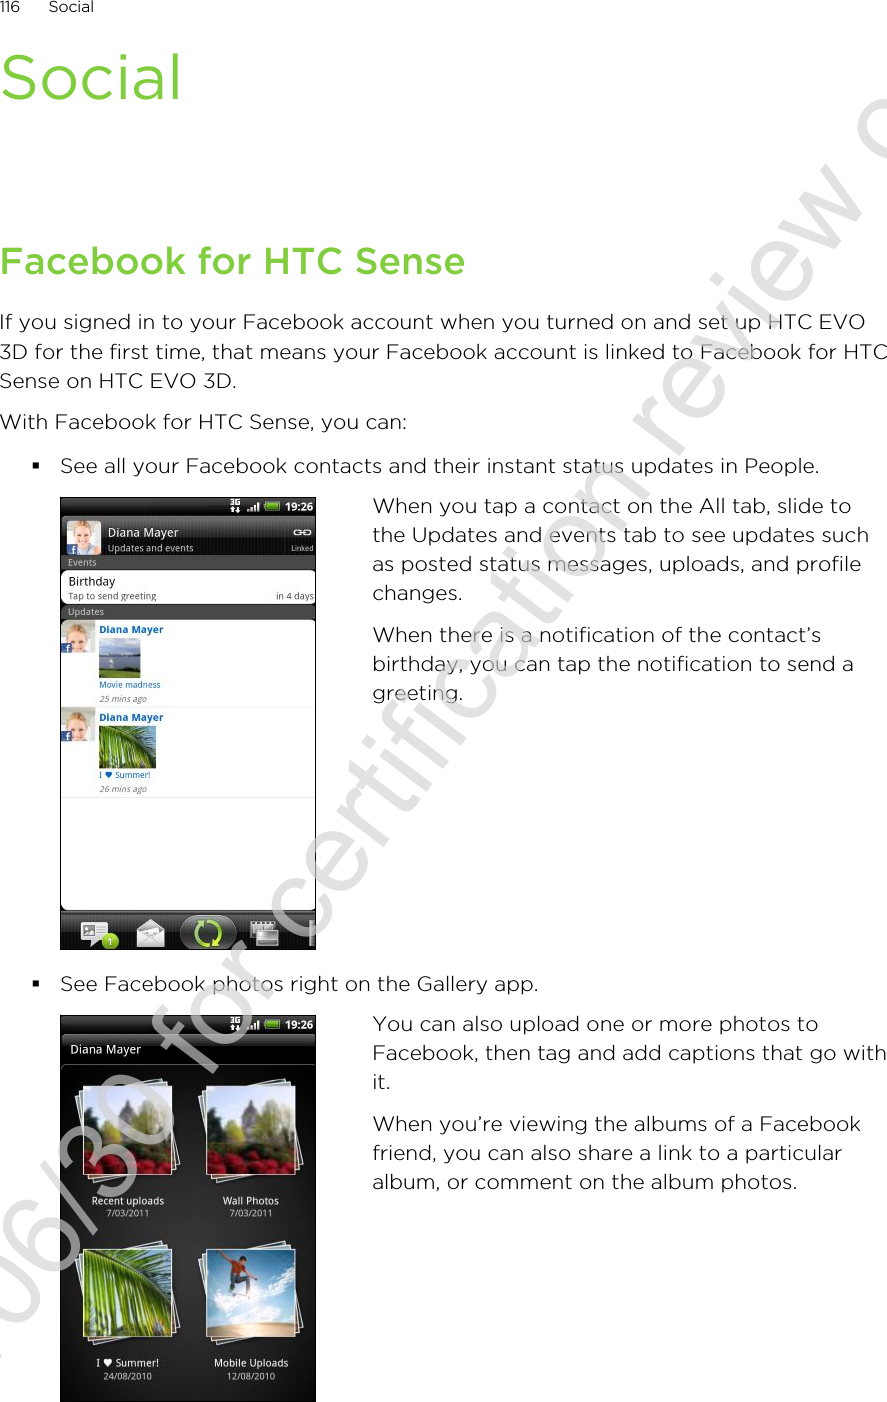 SocialFacebook for HTC SenseIf you signed in to your Facebook account when you turned on and set up HTC EVO3D for the first time, that means your Facebook account is linked to Facebook for HTCSense on HTC EVO 3D.With Facebook for HTC Sense, you can:§See all your Facebook contacts and their instant status updates in People.When you tap a contact on the All tab, slide tothe Updates and events tab to see updates suchas posted status messages, uploads, and profilechanges.When there is a notification of the contact’sbirthday, you can tap the notification to send agreeting.§See Facebook photos right on the Gallery app.You can also upload one or more photos toFacebook, then tag and add captions that go withit.When you’re viewing the albums of a Facebookfriend, you can also share a link to a particularalbum, or comment on the album photos.116 Social2011/06/30 for certification review only